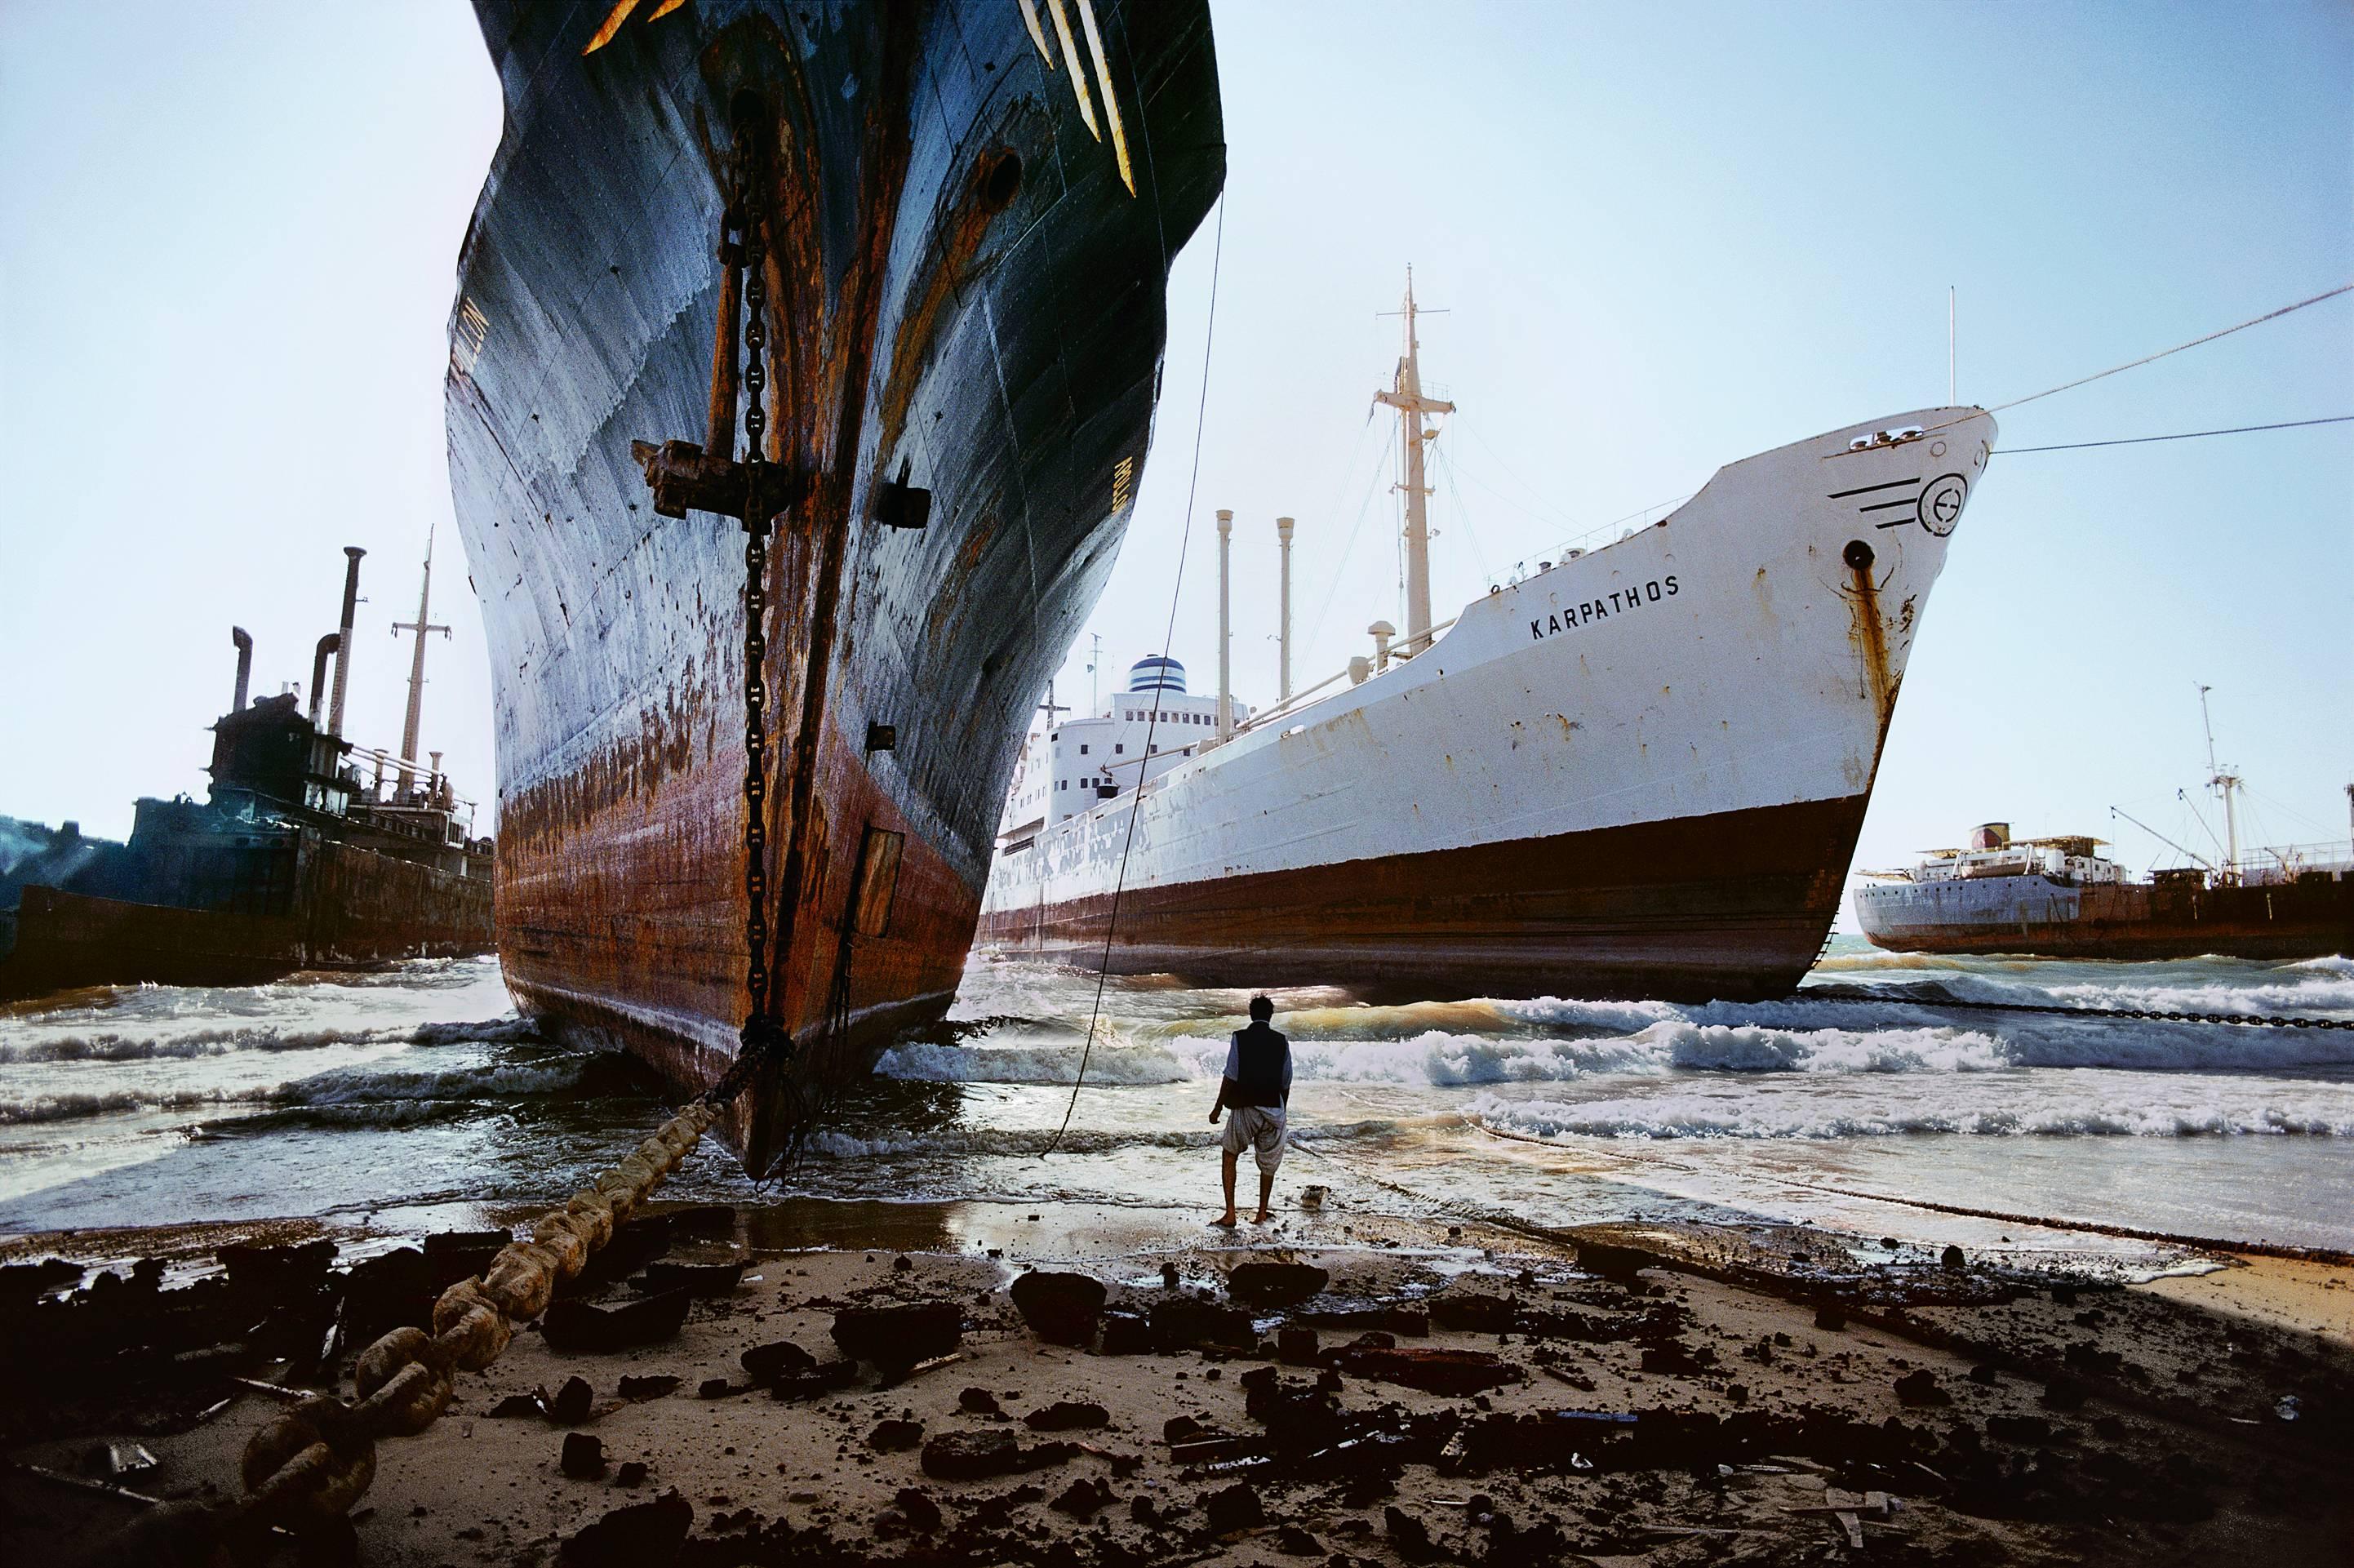 Ship Breaking Yard, Karachi, Pakistan, 1985 - Steve McCurry (Colour Photography)
Signed and numbered on photographer's edition label on reverse 
Digital C-Type print
20 x 24 inches 
From an edition of 30  

Also available in two larger sizes, please